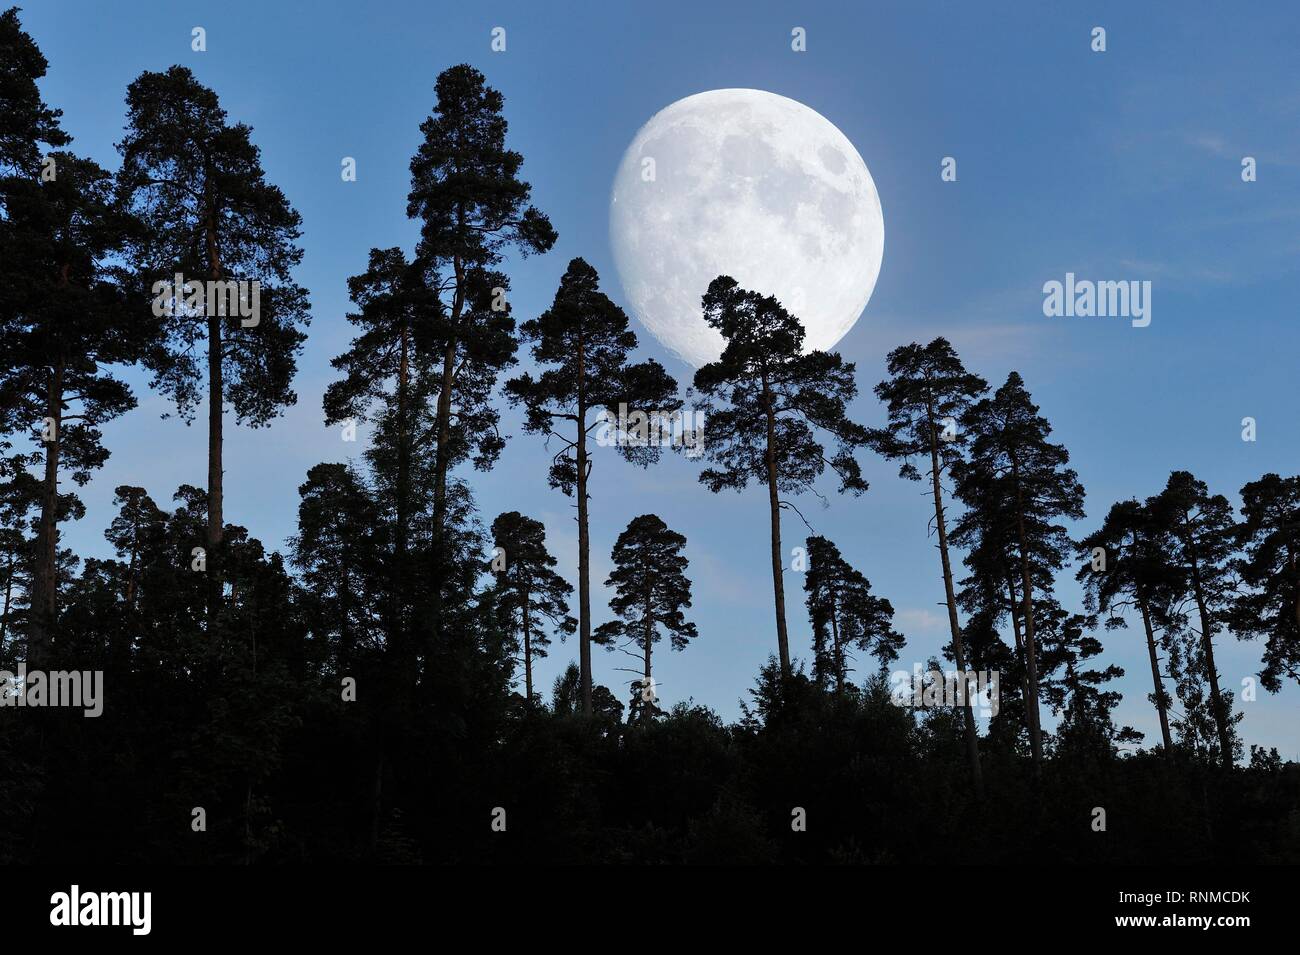 Pine forest with full moon, Baden-Württemberg, Germany Stock Photo